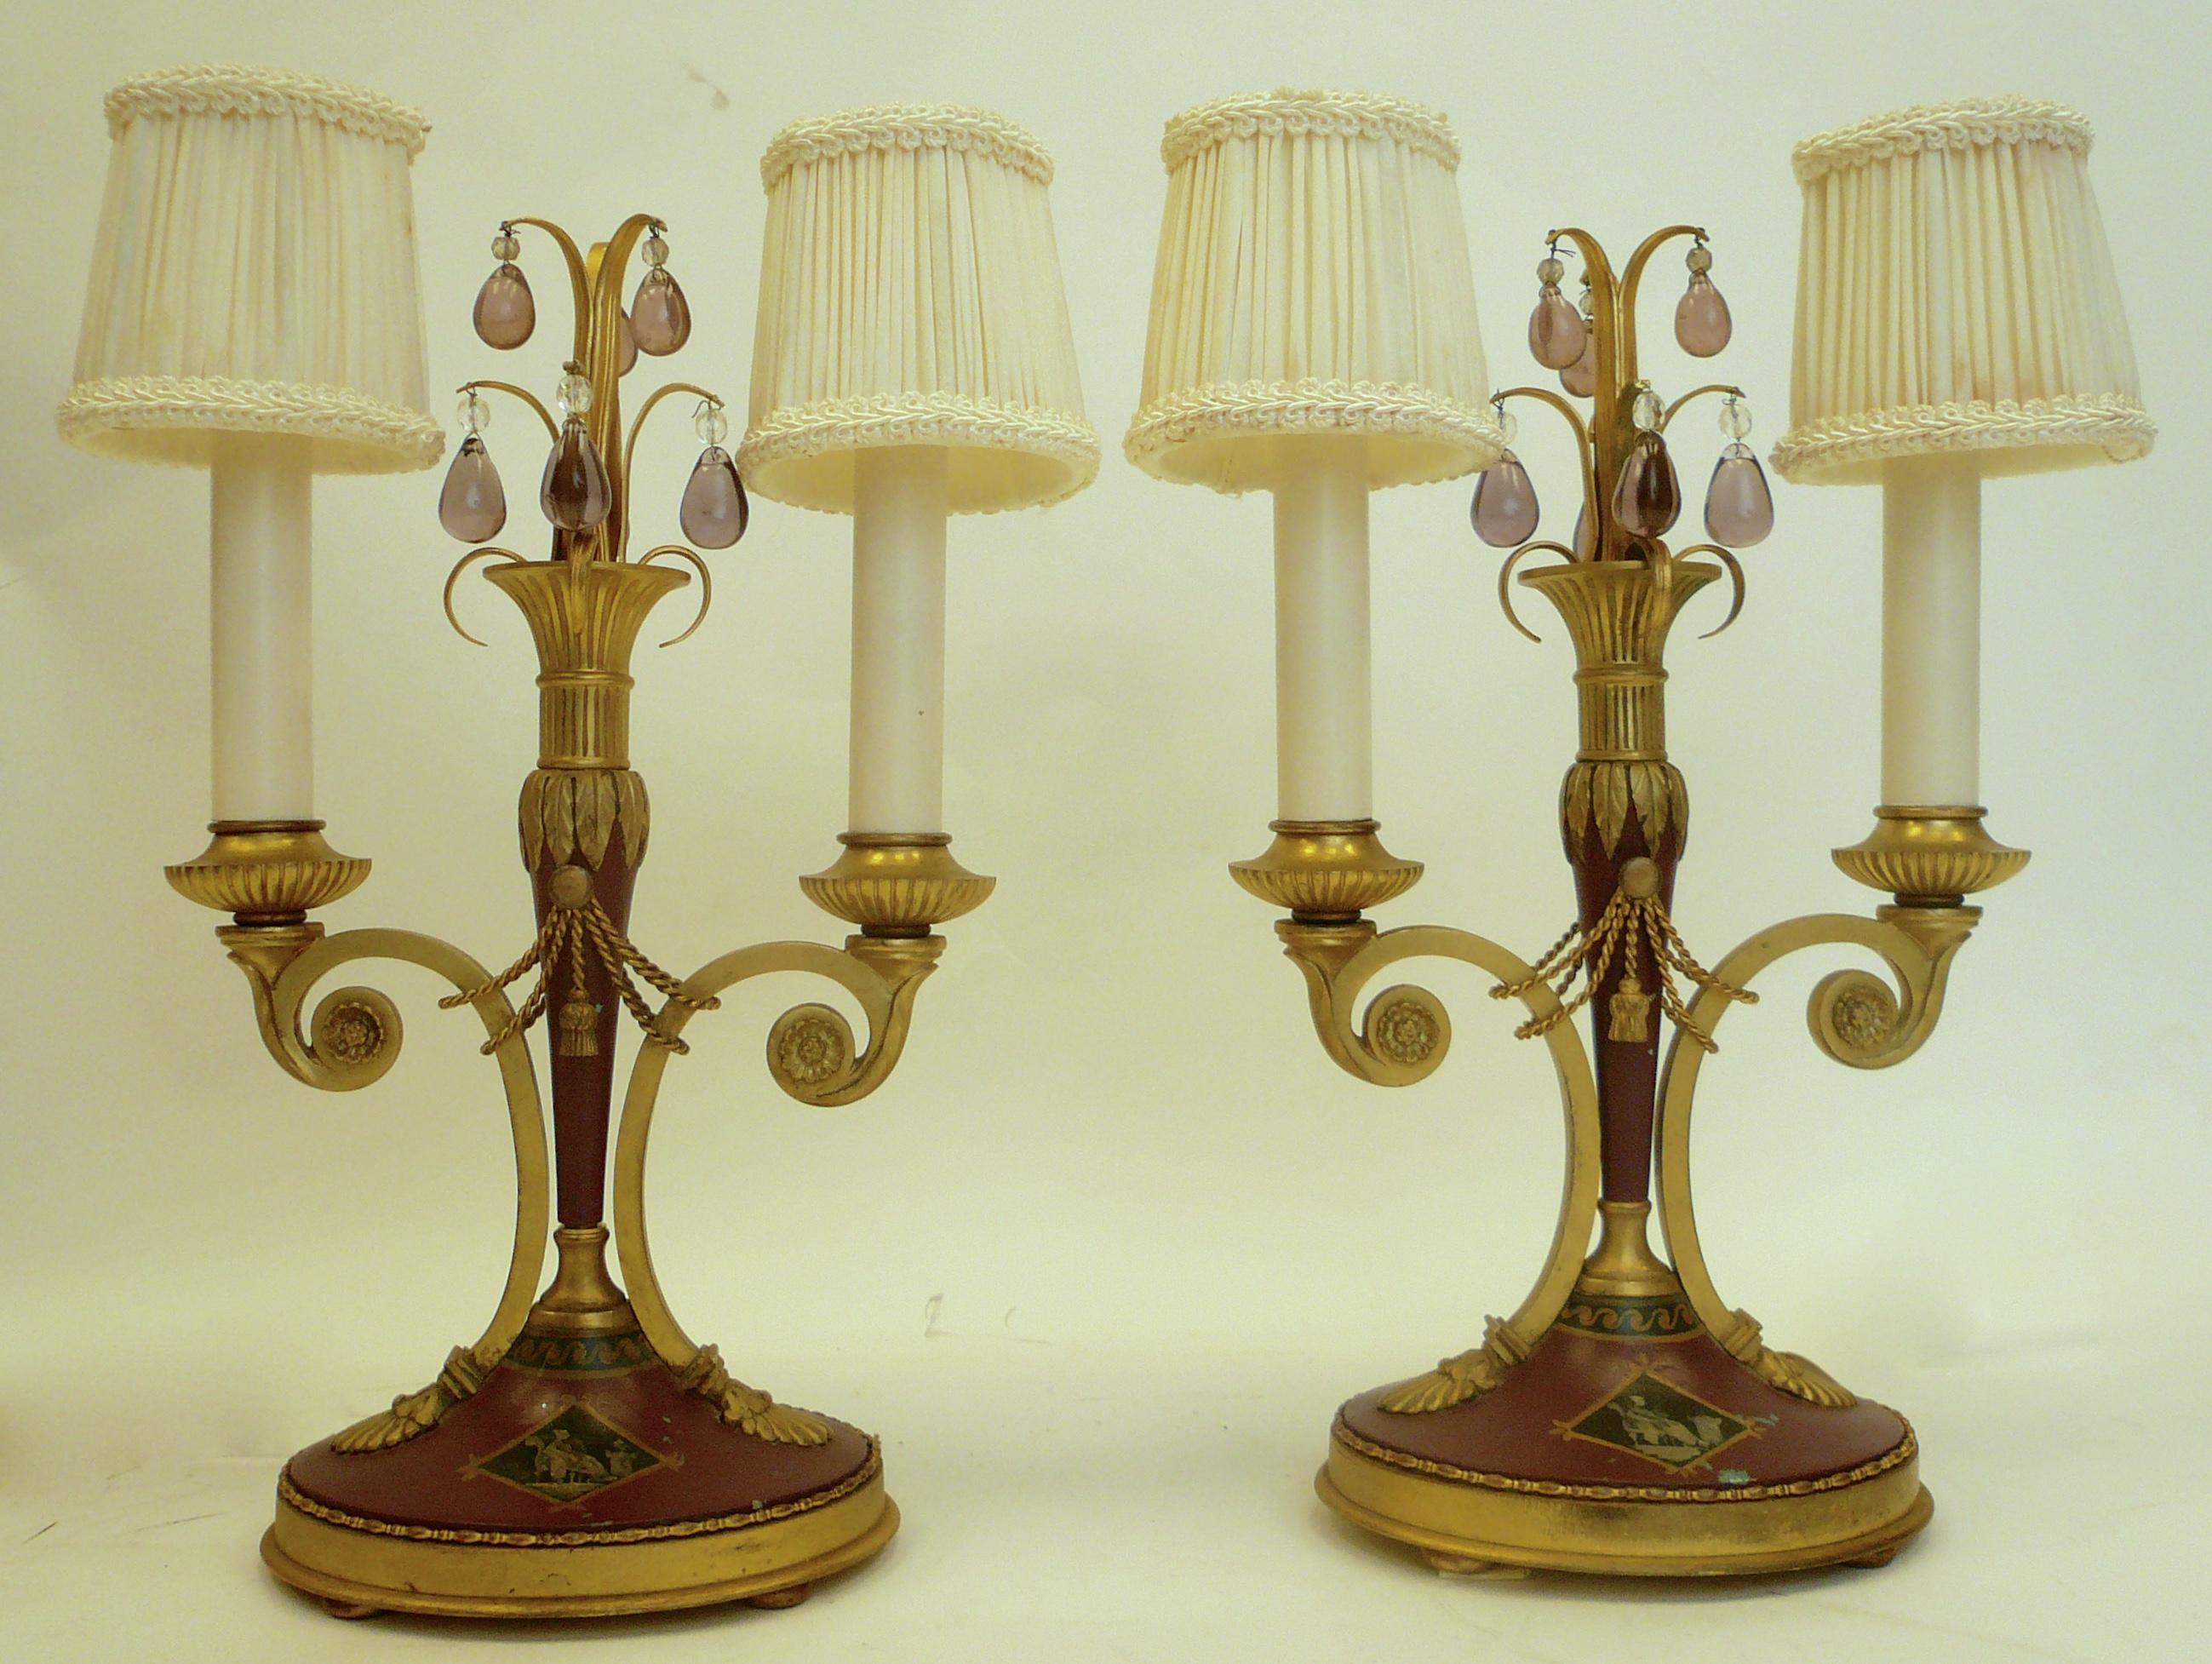 French Pair of Directoire Style Gilt Bronze and Tole Painted Candelabra Lamps